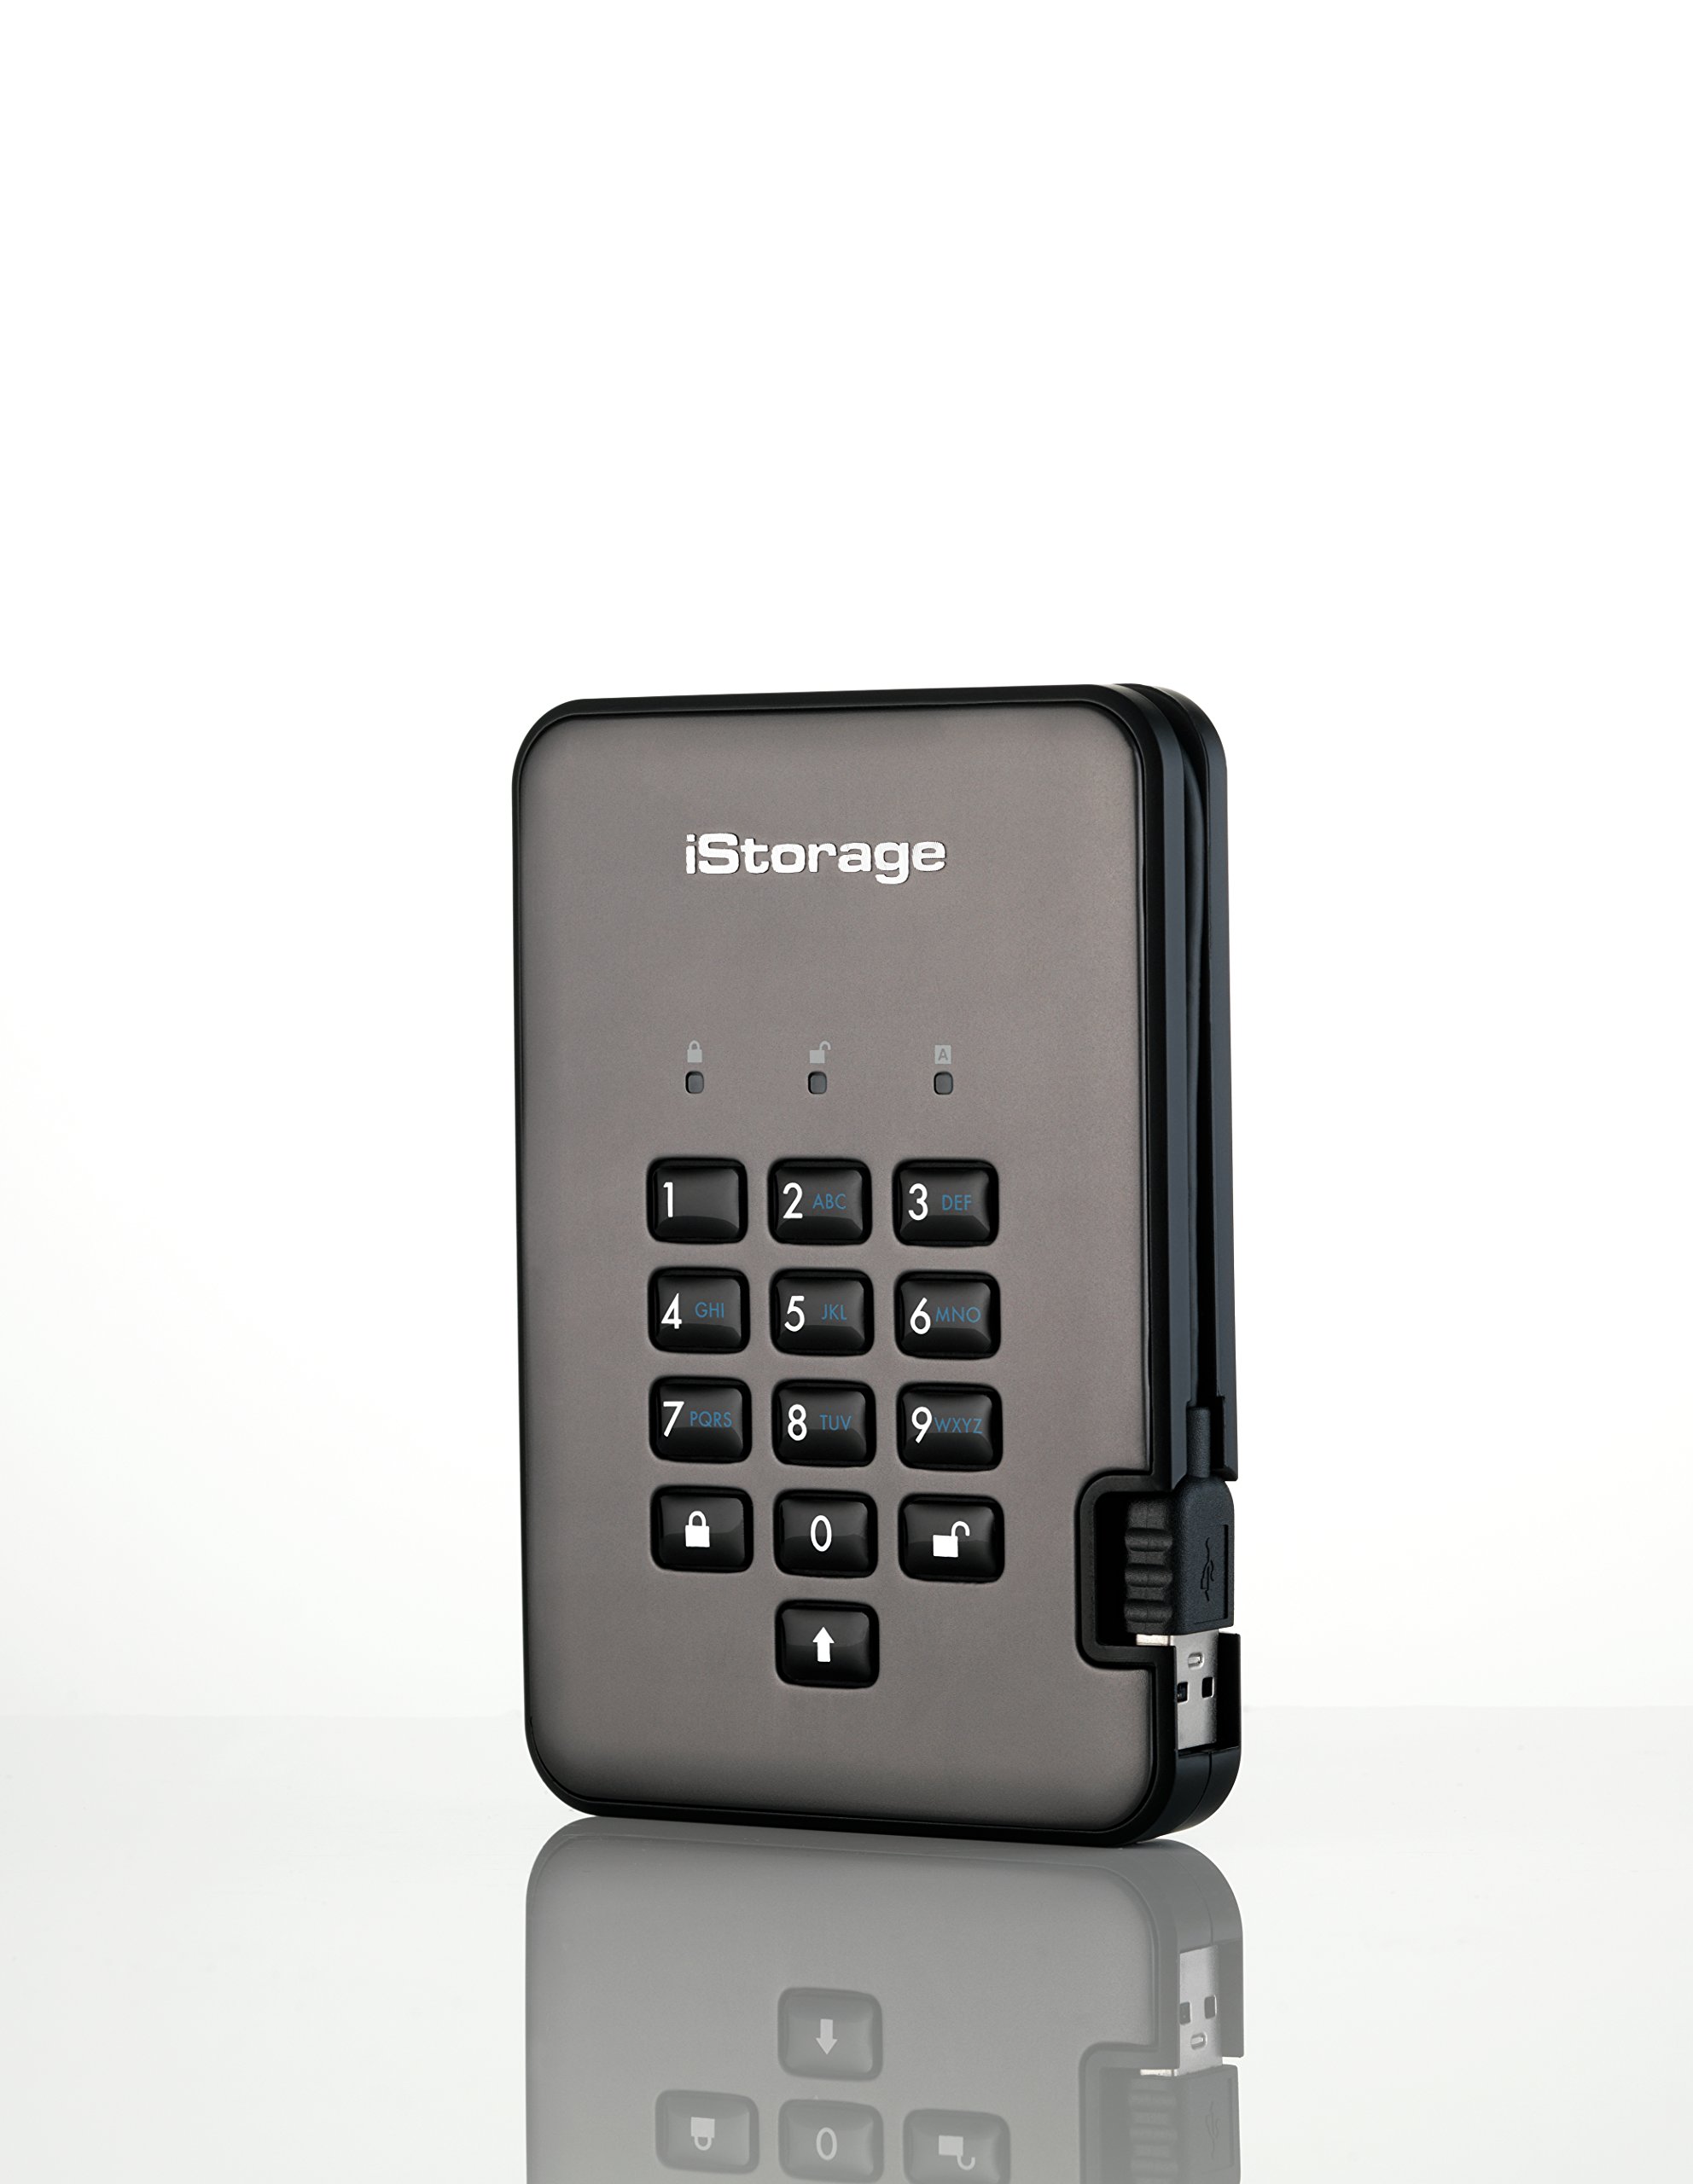 iStorage diskAshur PRO2 SSD 2TB Secure portable solid-state drive - FIPS Level 2 certified - Password protected, dust & water resistant, military grade hardware encryption IS-DAP2-256-SSD-2000-C-G